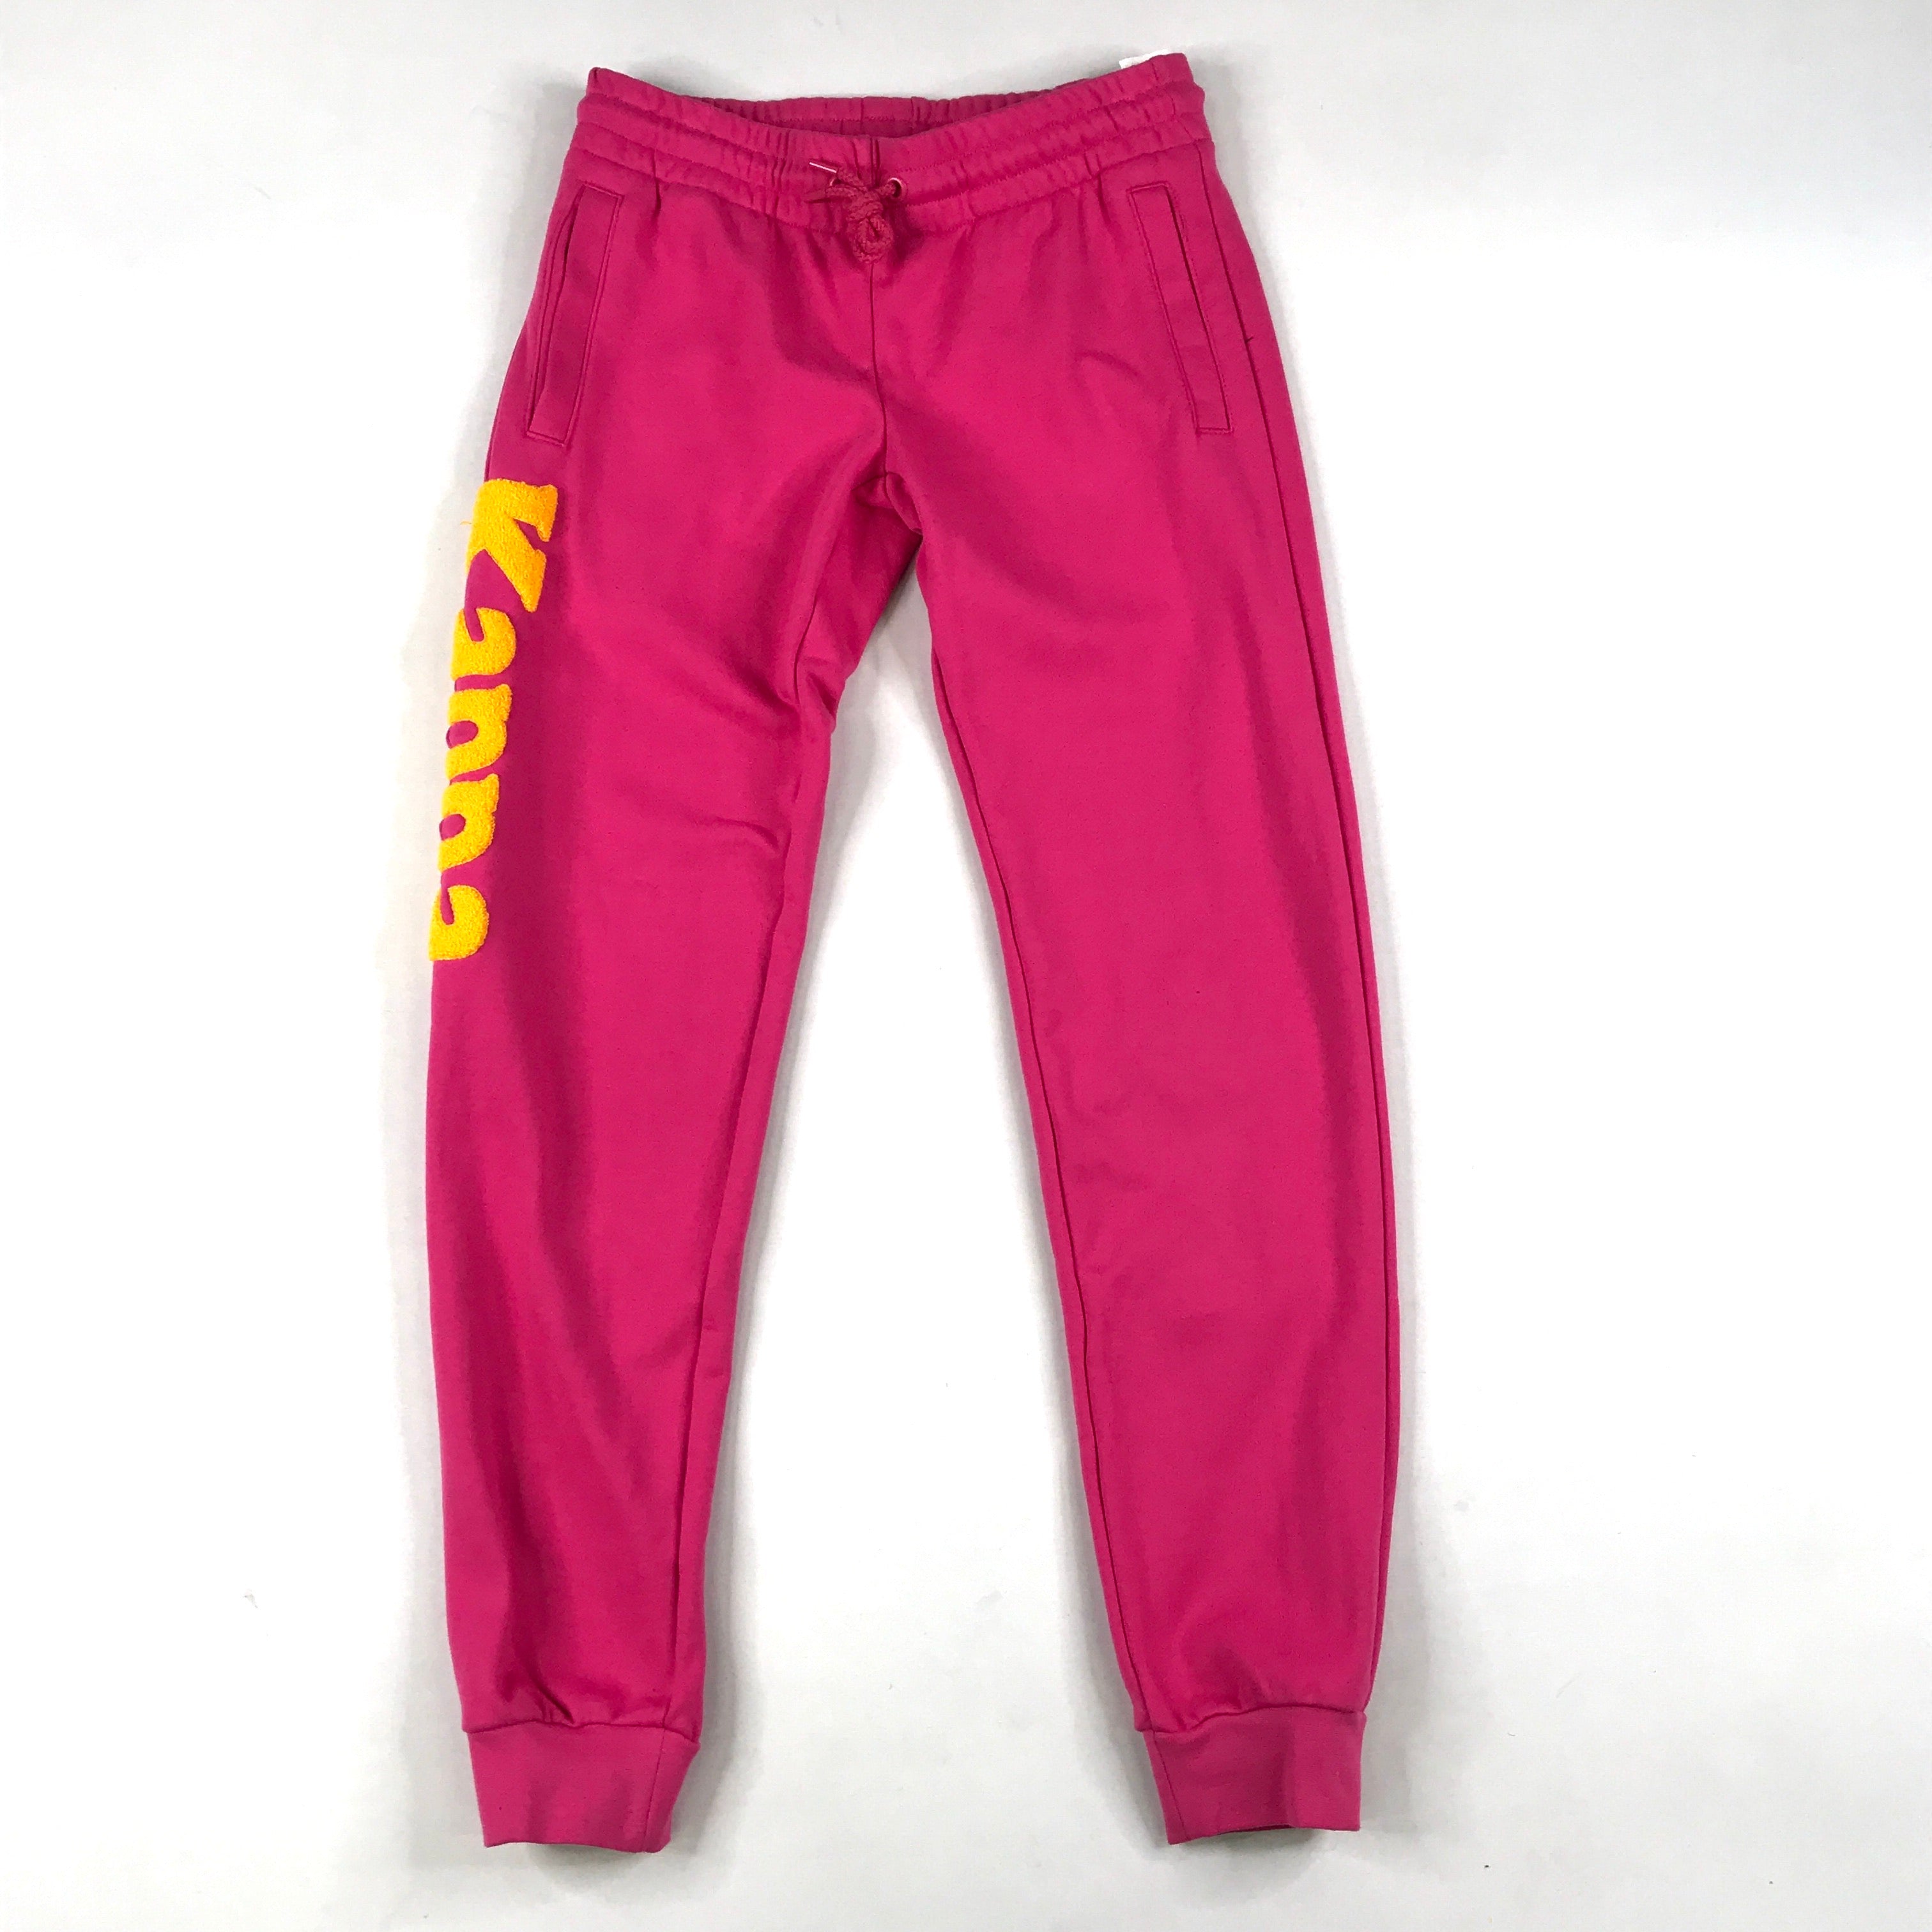 Kappa authentic breat joggers in pink-gold-white